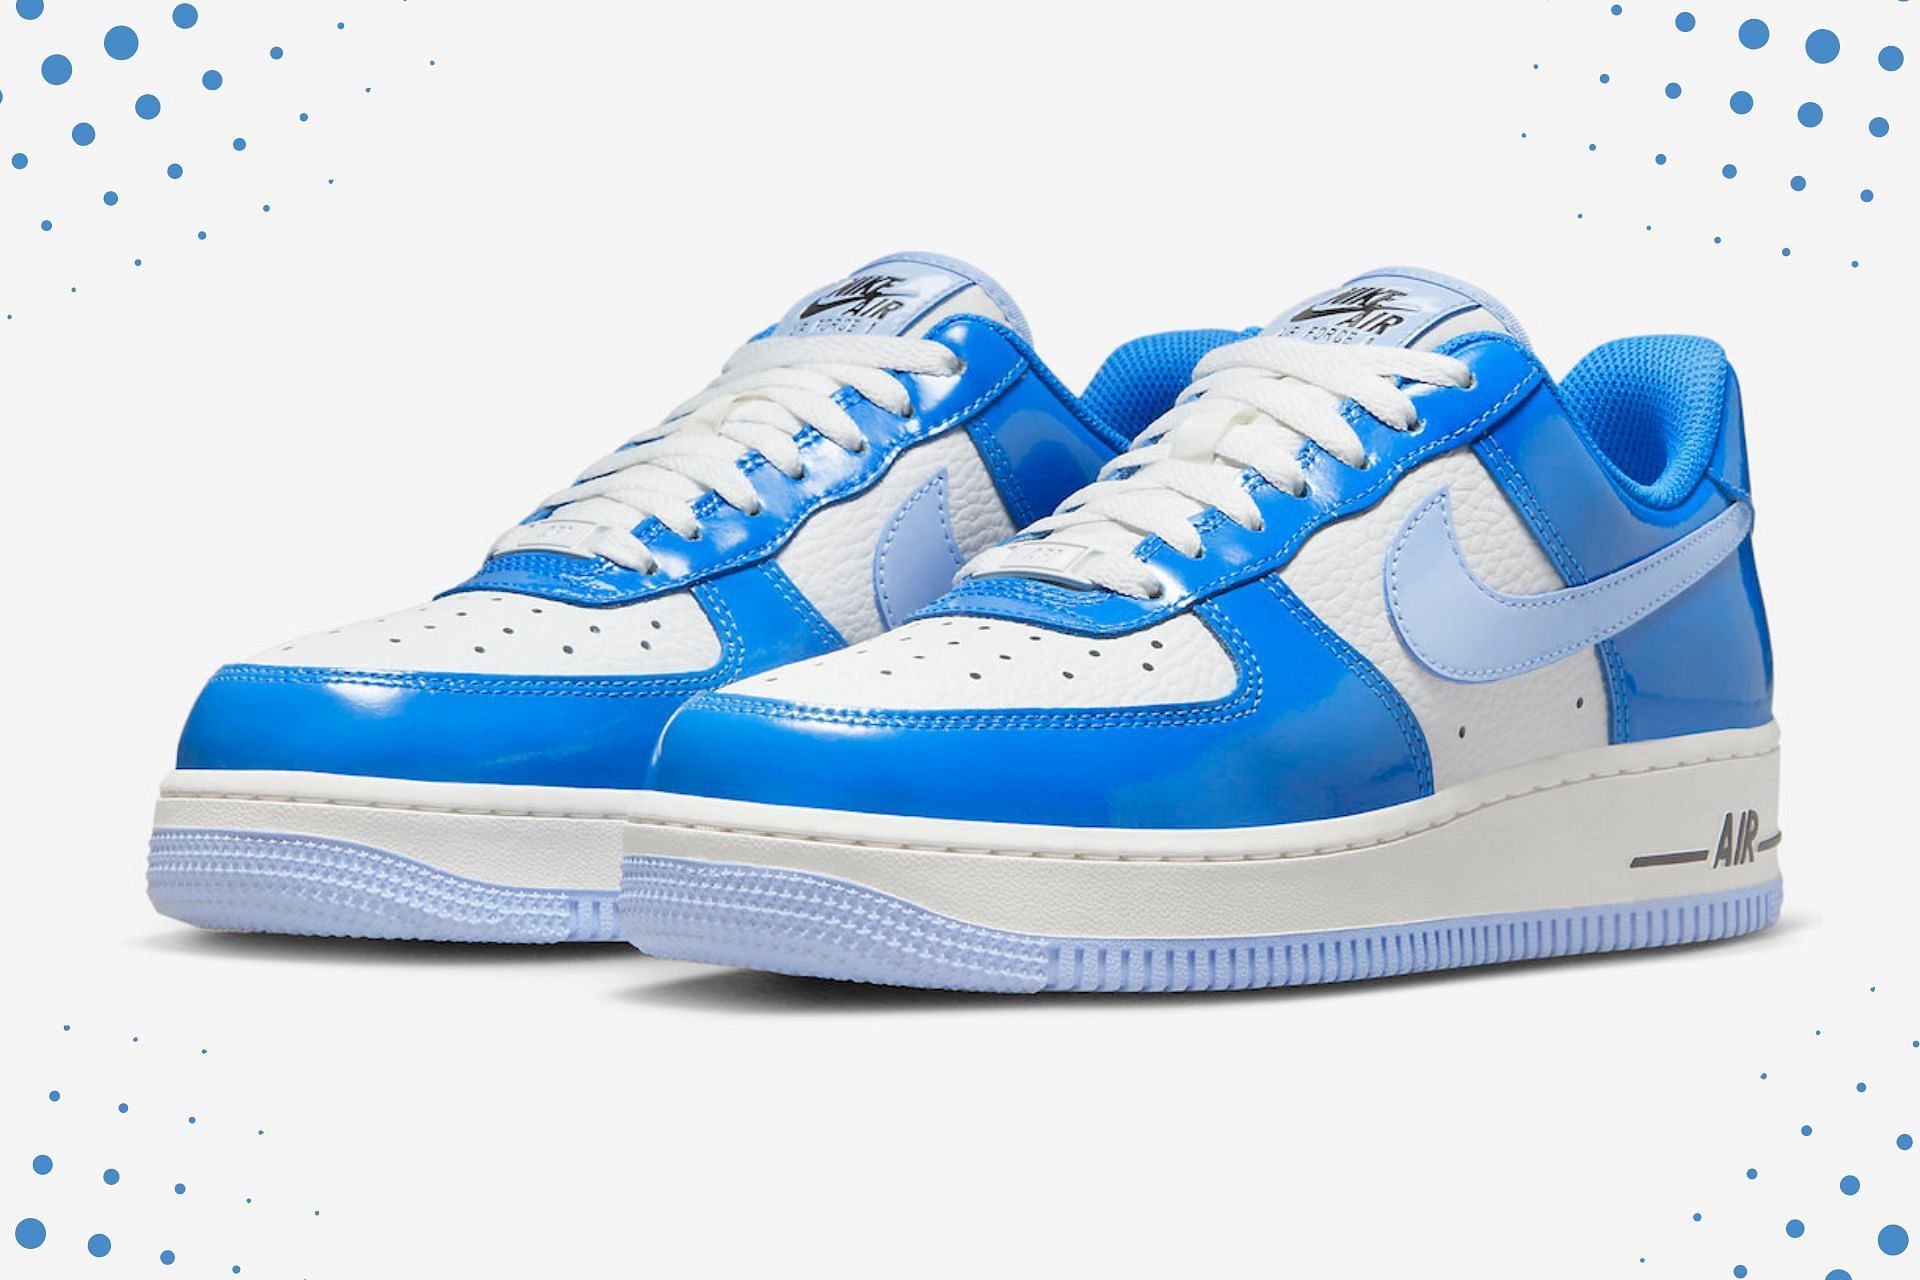 Nike Air Force 1 Low Blue Patent colorway (Image via Nike)